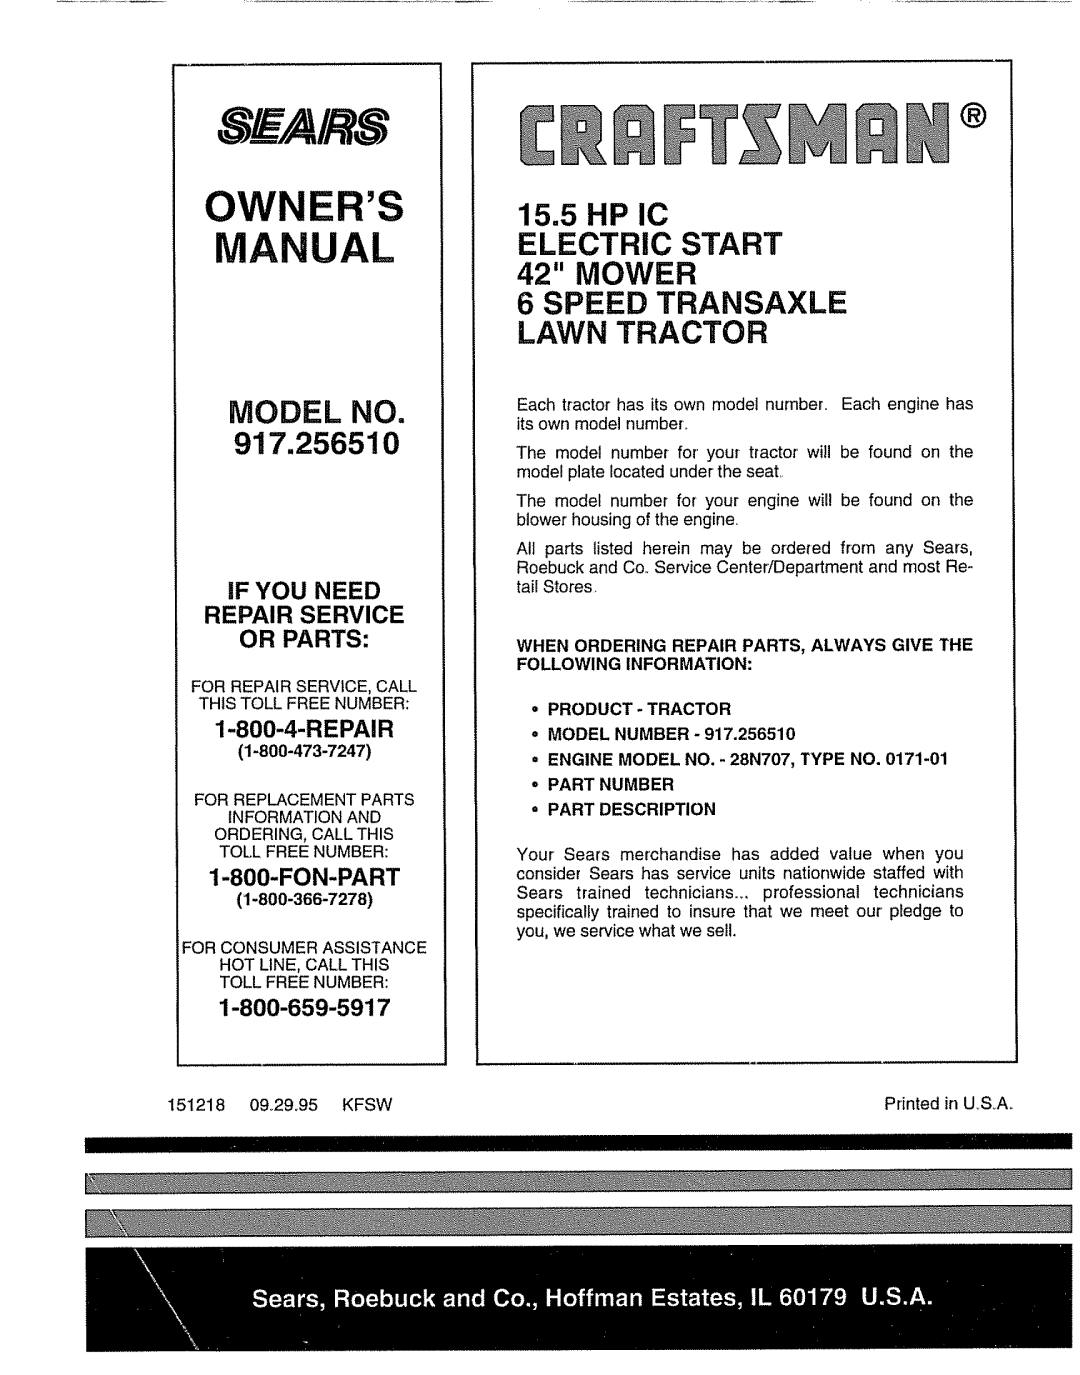 Craftsman 917.25651 Owners Manual, Model No, 15.5HP IC ELECTRIC START 42 MOWER, Speed Transaxle Lawn Tractor, Repair 